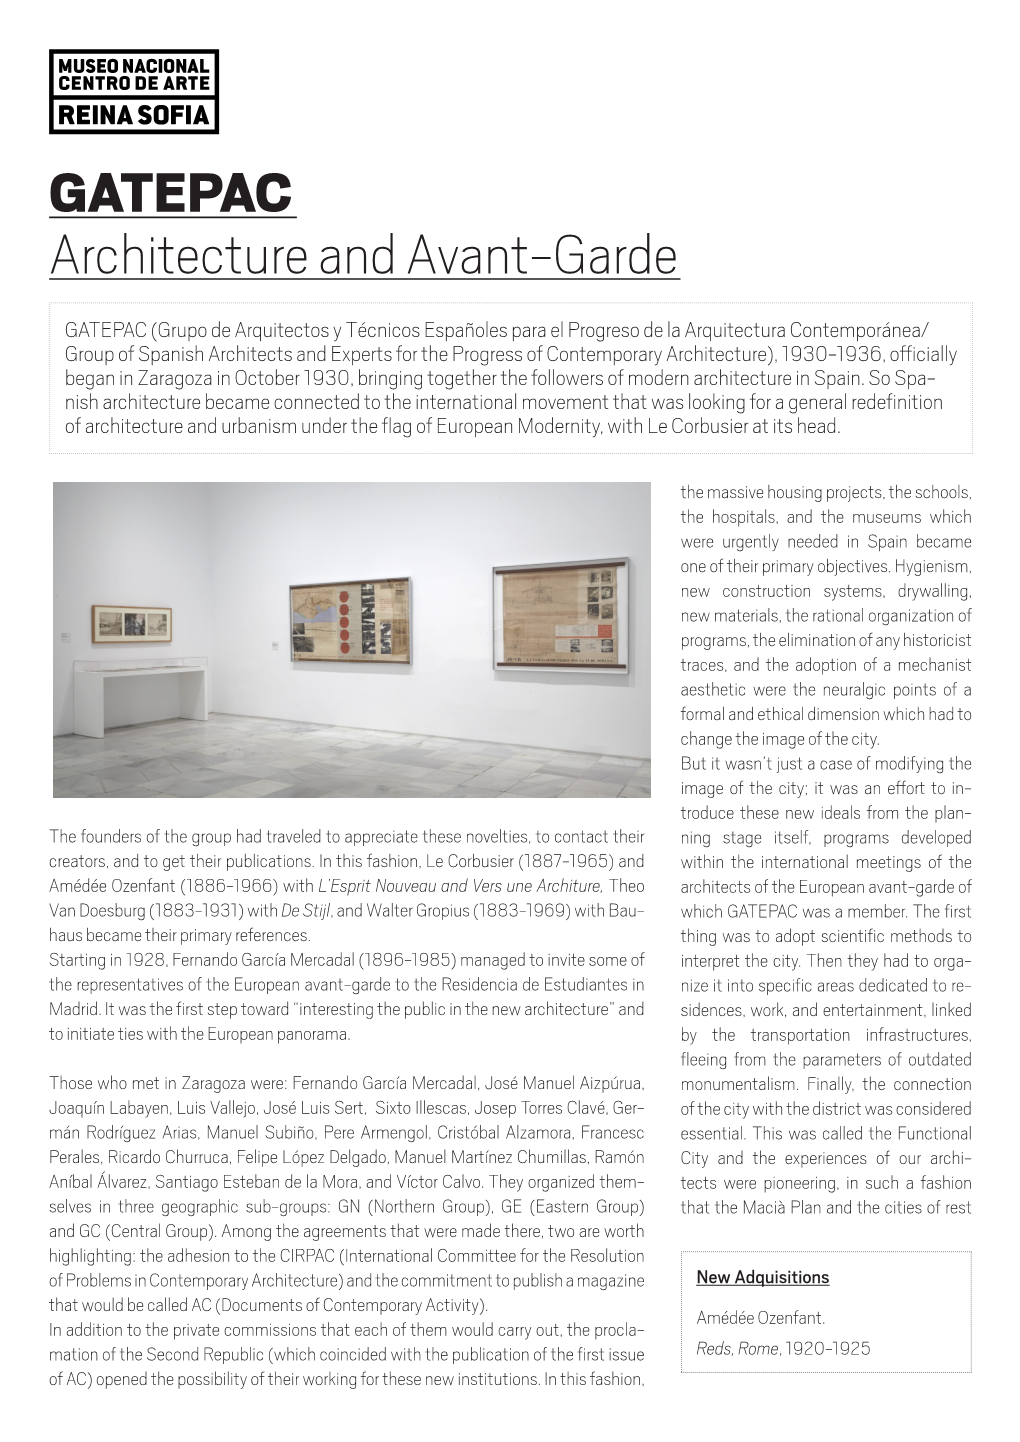 GATEPAC Architecture and Avant-Garde